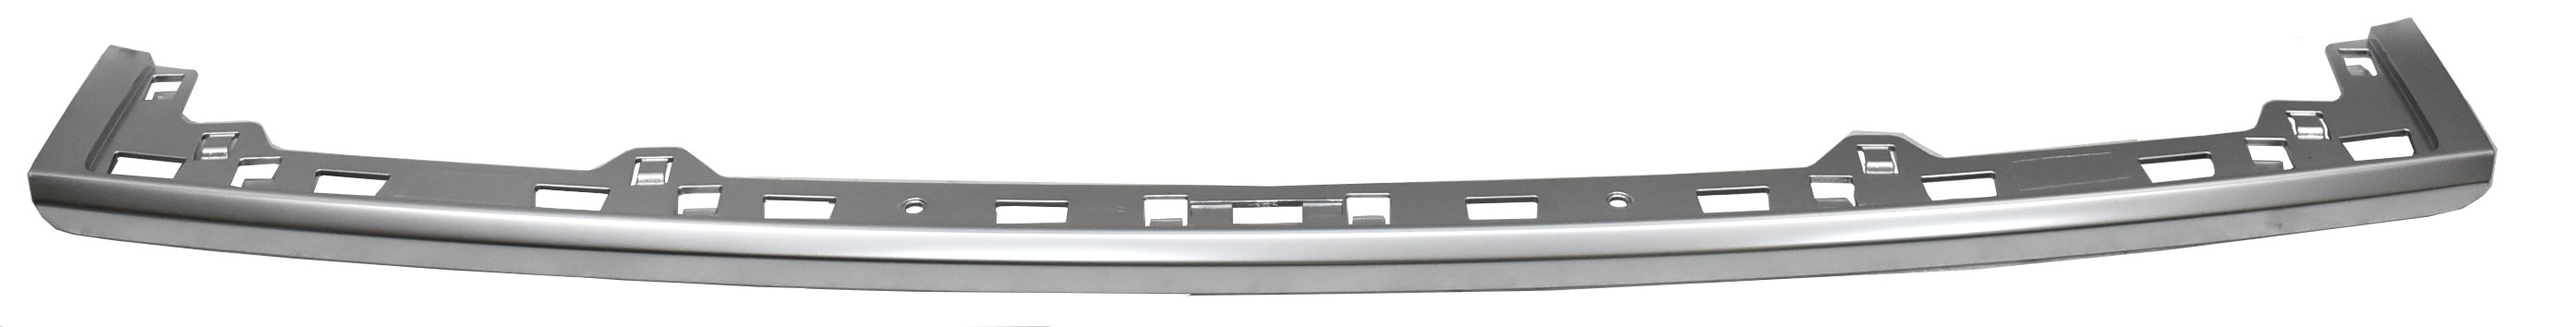 Aftermarket METAL REAR BUMPERS for JEEP - GRAND CHEROKEE WK, GRAND CHEROKEE WK,22-22,Rear bumper step pad